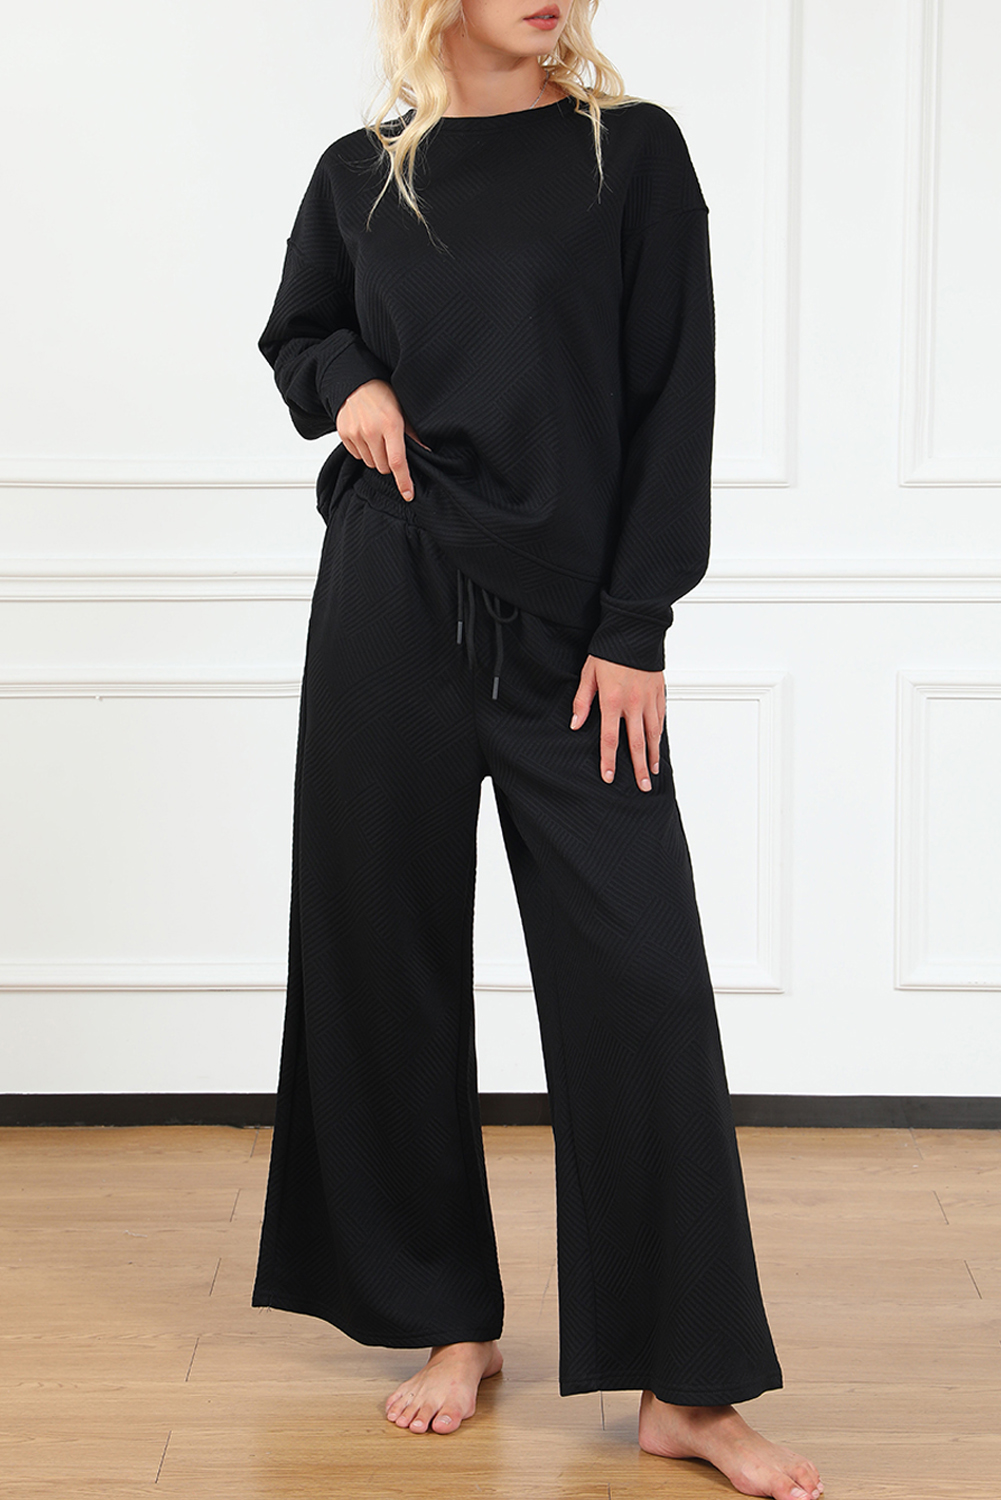 Black Textured Loose Slouchy Long Sleeve Top and PANTS Set